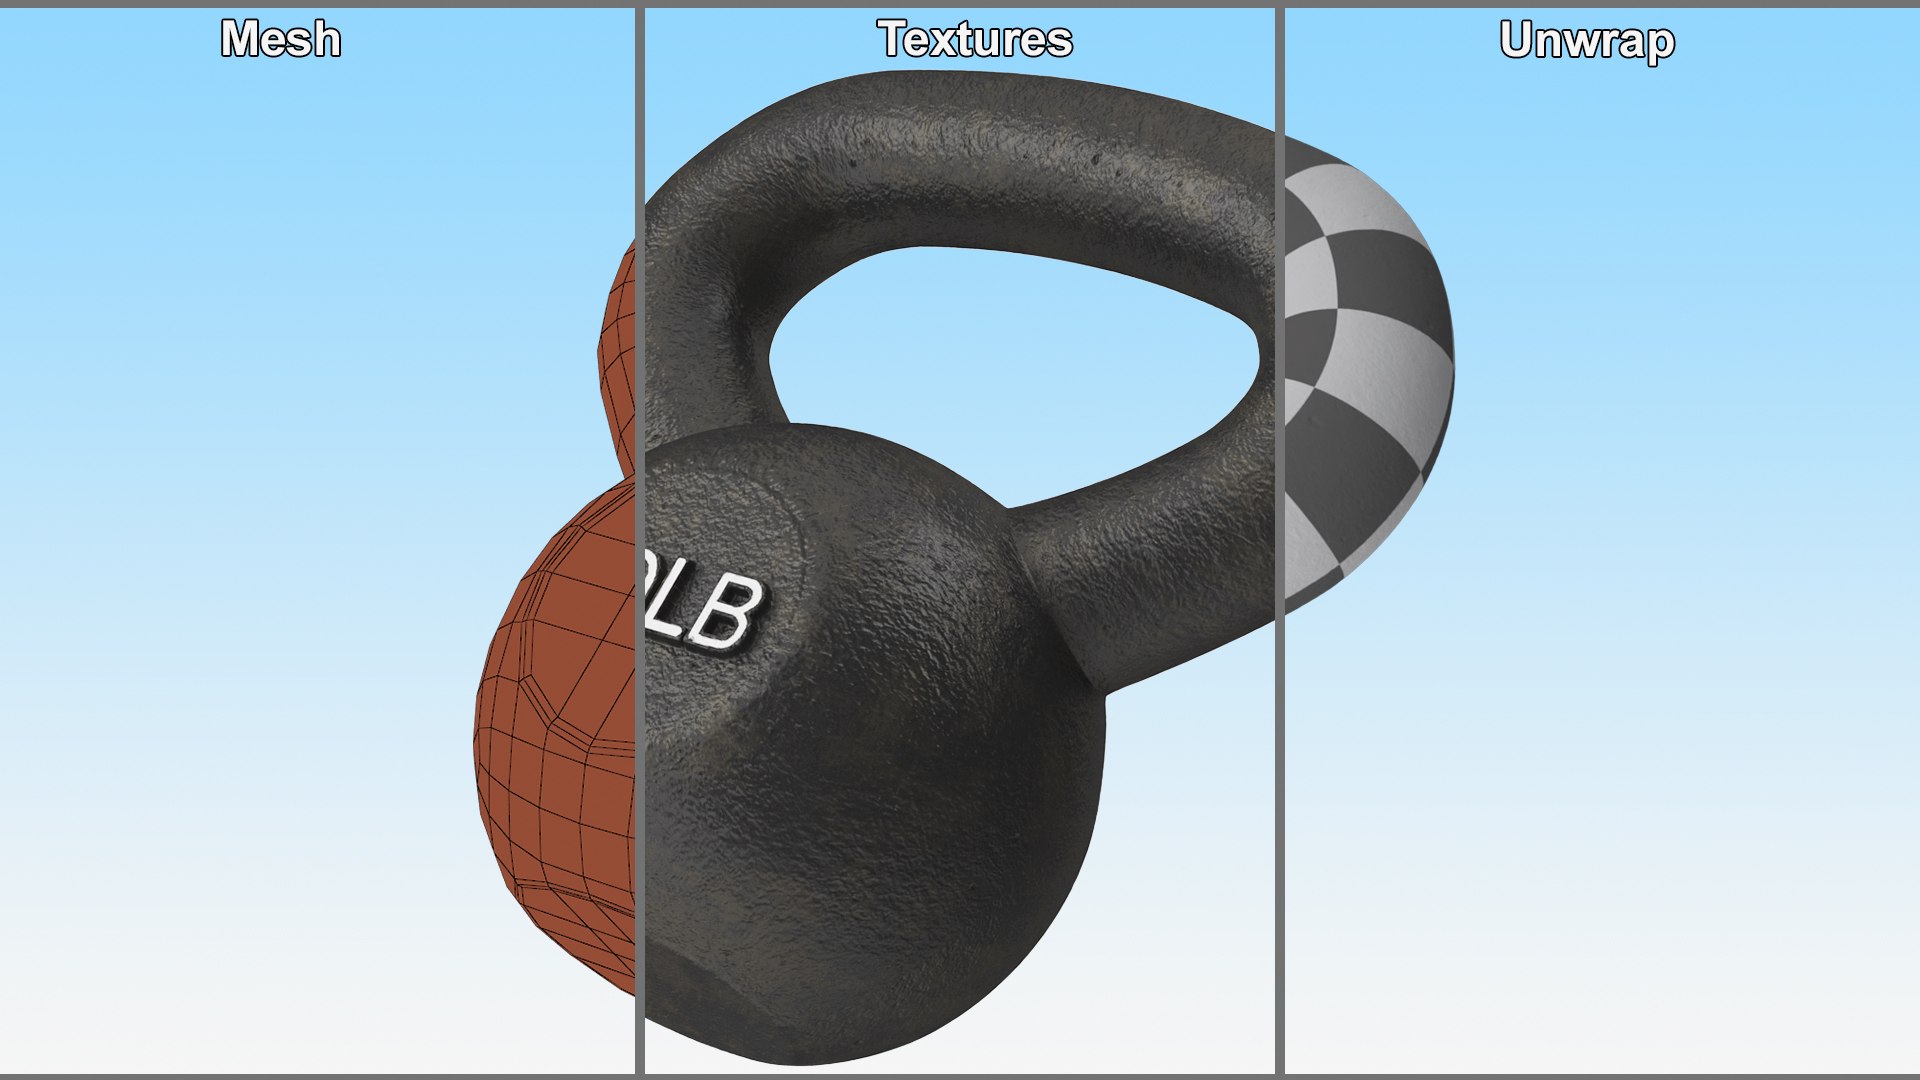 3D Iron Competition Kettlebell Weight 50lb Model - TurboSquid 2065188